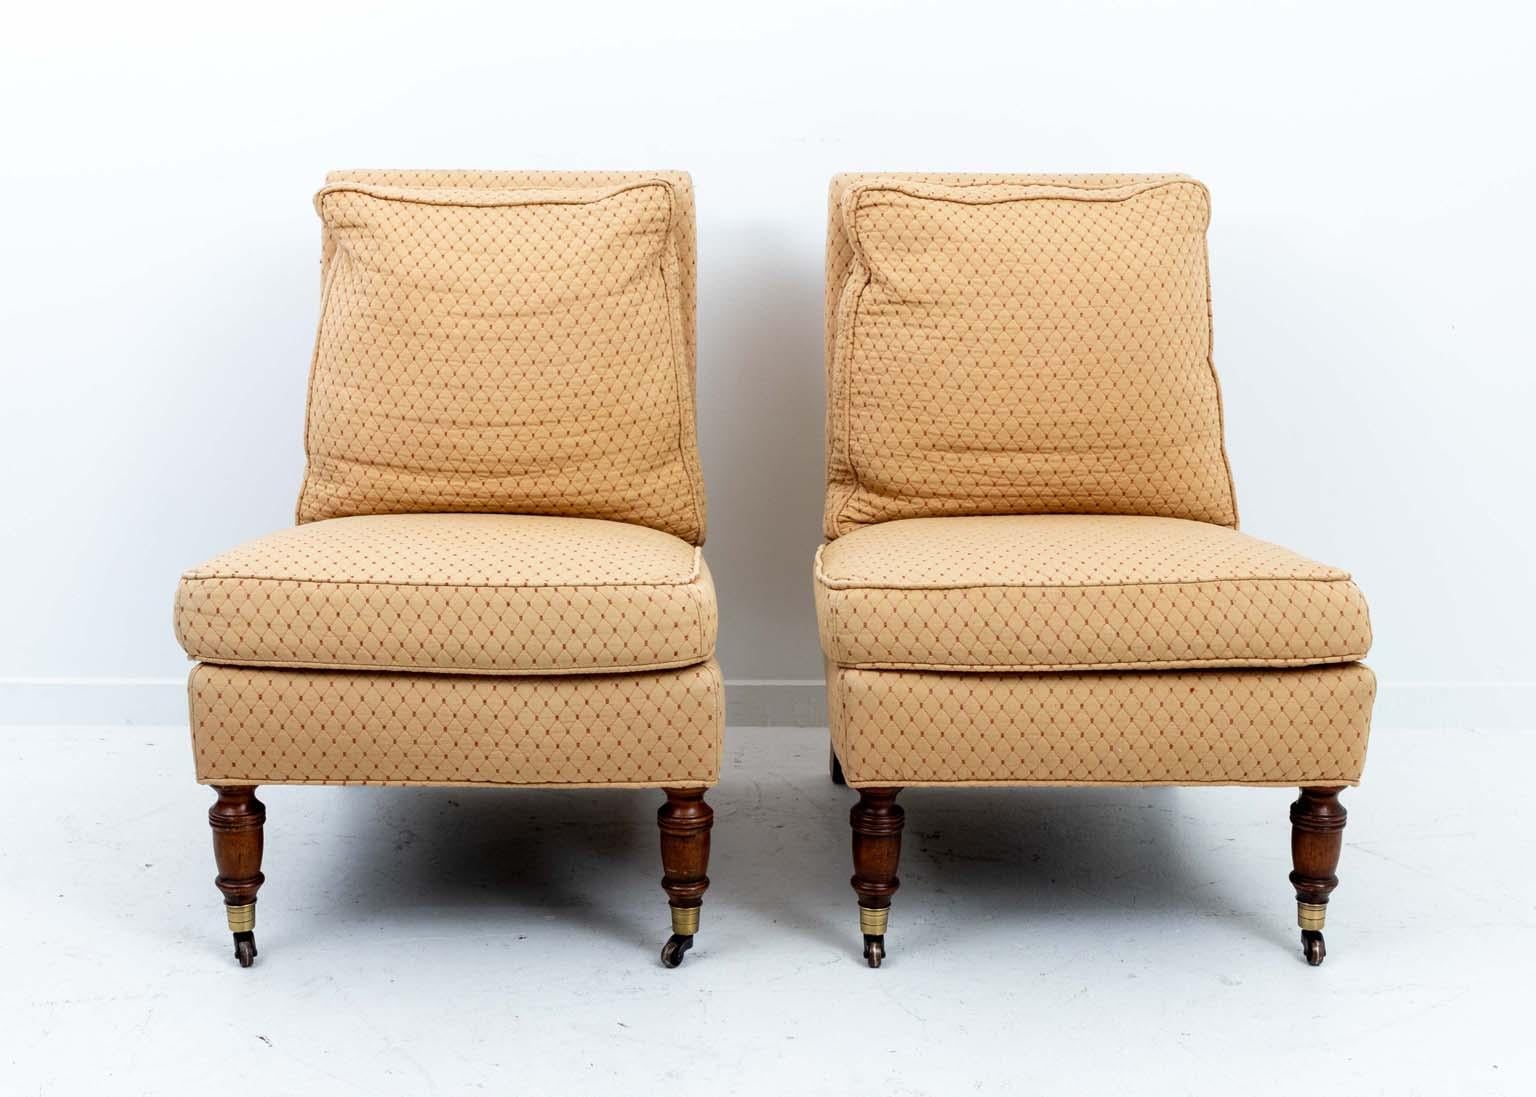 Comfortable pair of upholstered armless chairs with turned mahogany front legs in brass casters. The back legs are mahogany and straight. The back pillow is feather down filled and is attached. 
